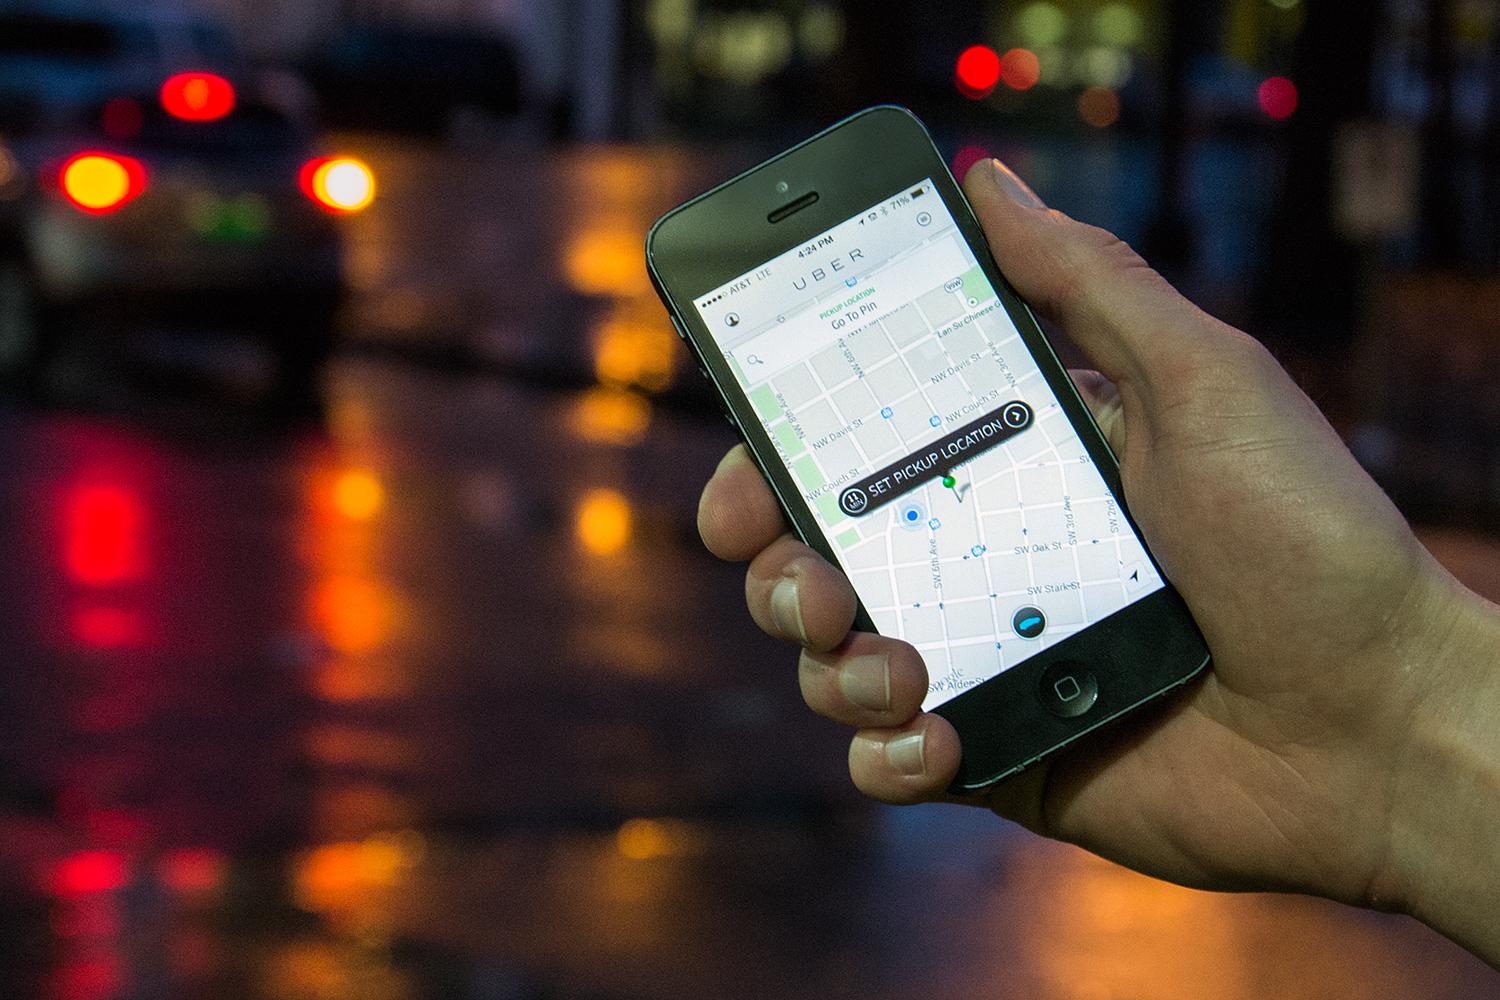 Uber launches in Portland without city's approval